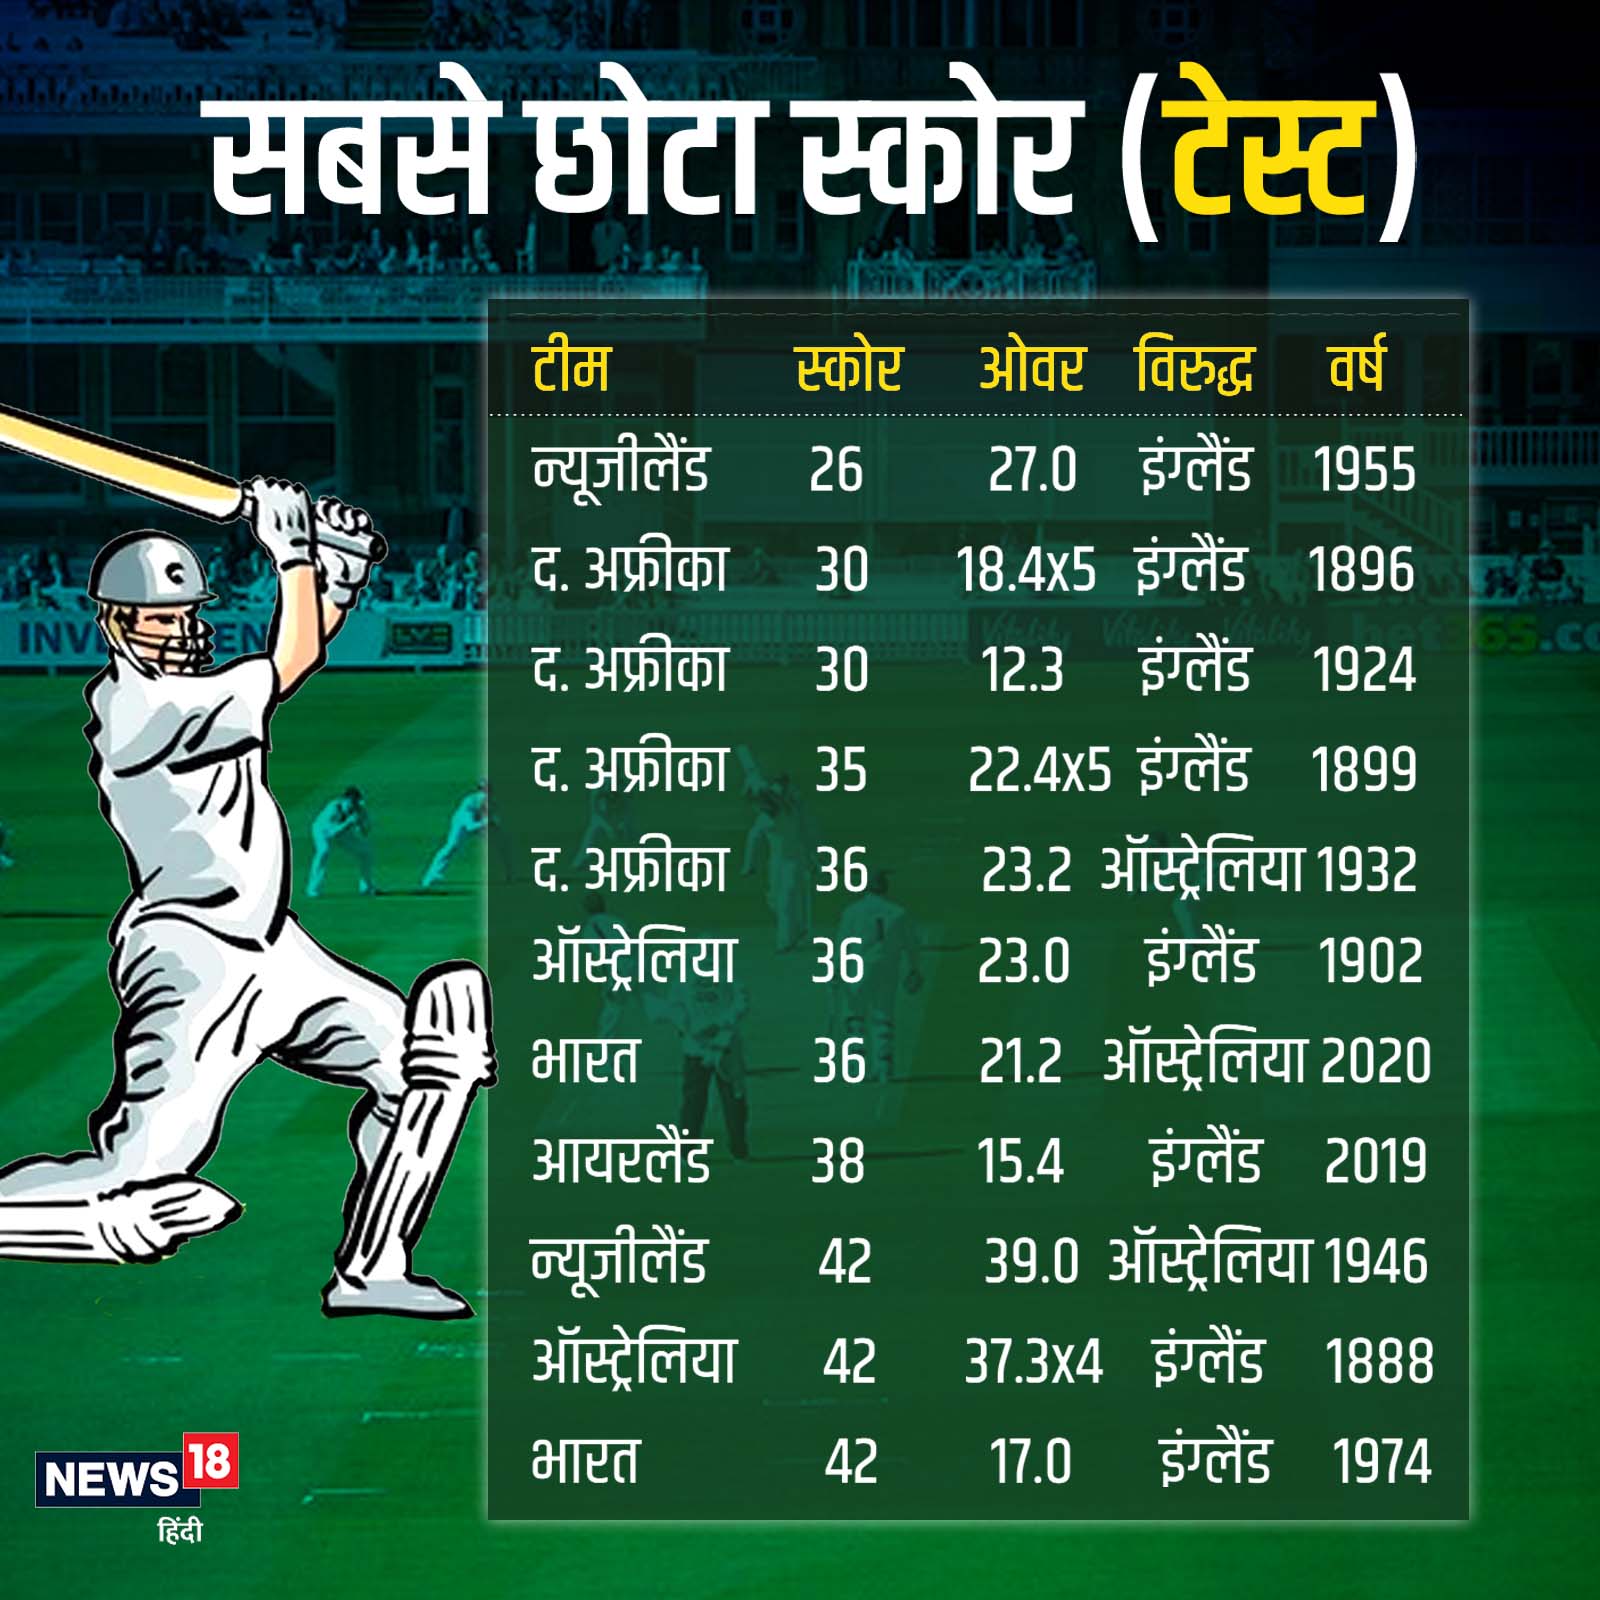  lowest Score, lowest Test Score, lowest score in history, What is lowest test score, England, New Zealand, New Zealand 26 Run all out, Cricket News, Cricket News in Hindi, Test cricket, Cricket Records, Number Game